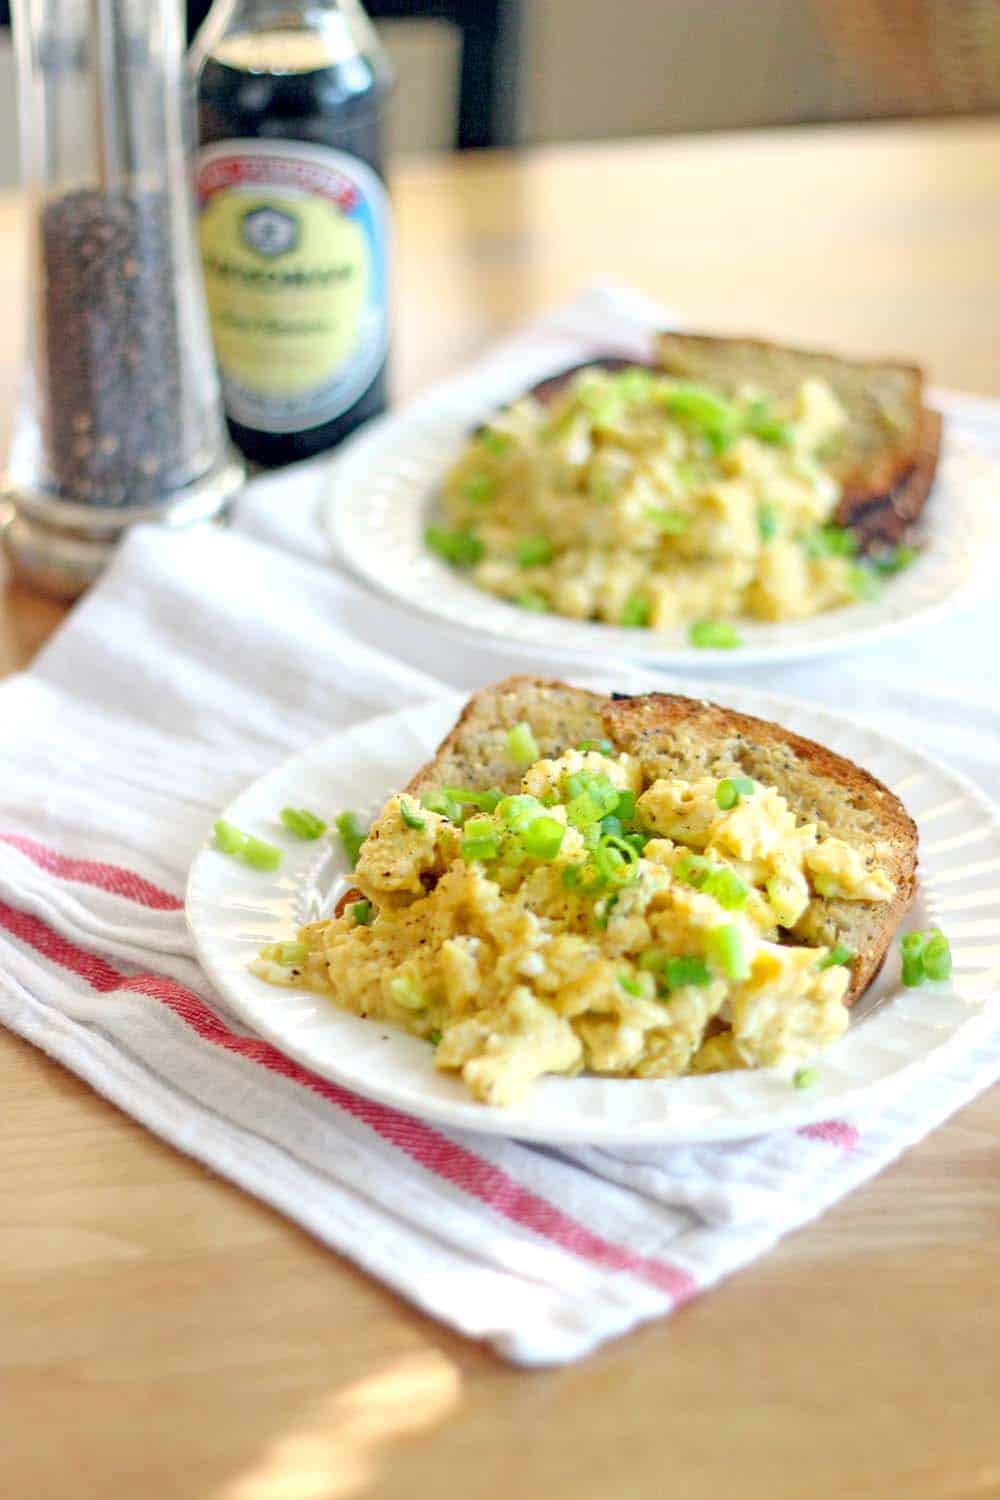 These soy sauce and green onion scrambled eggs are melt-in-your-mouth delicious and take only 5 minutes to make! The perfect low carb, high protein breakfast to get you going for the day.